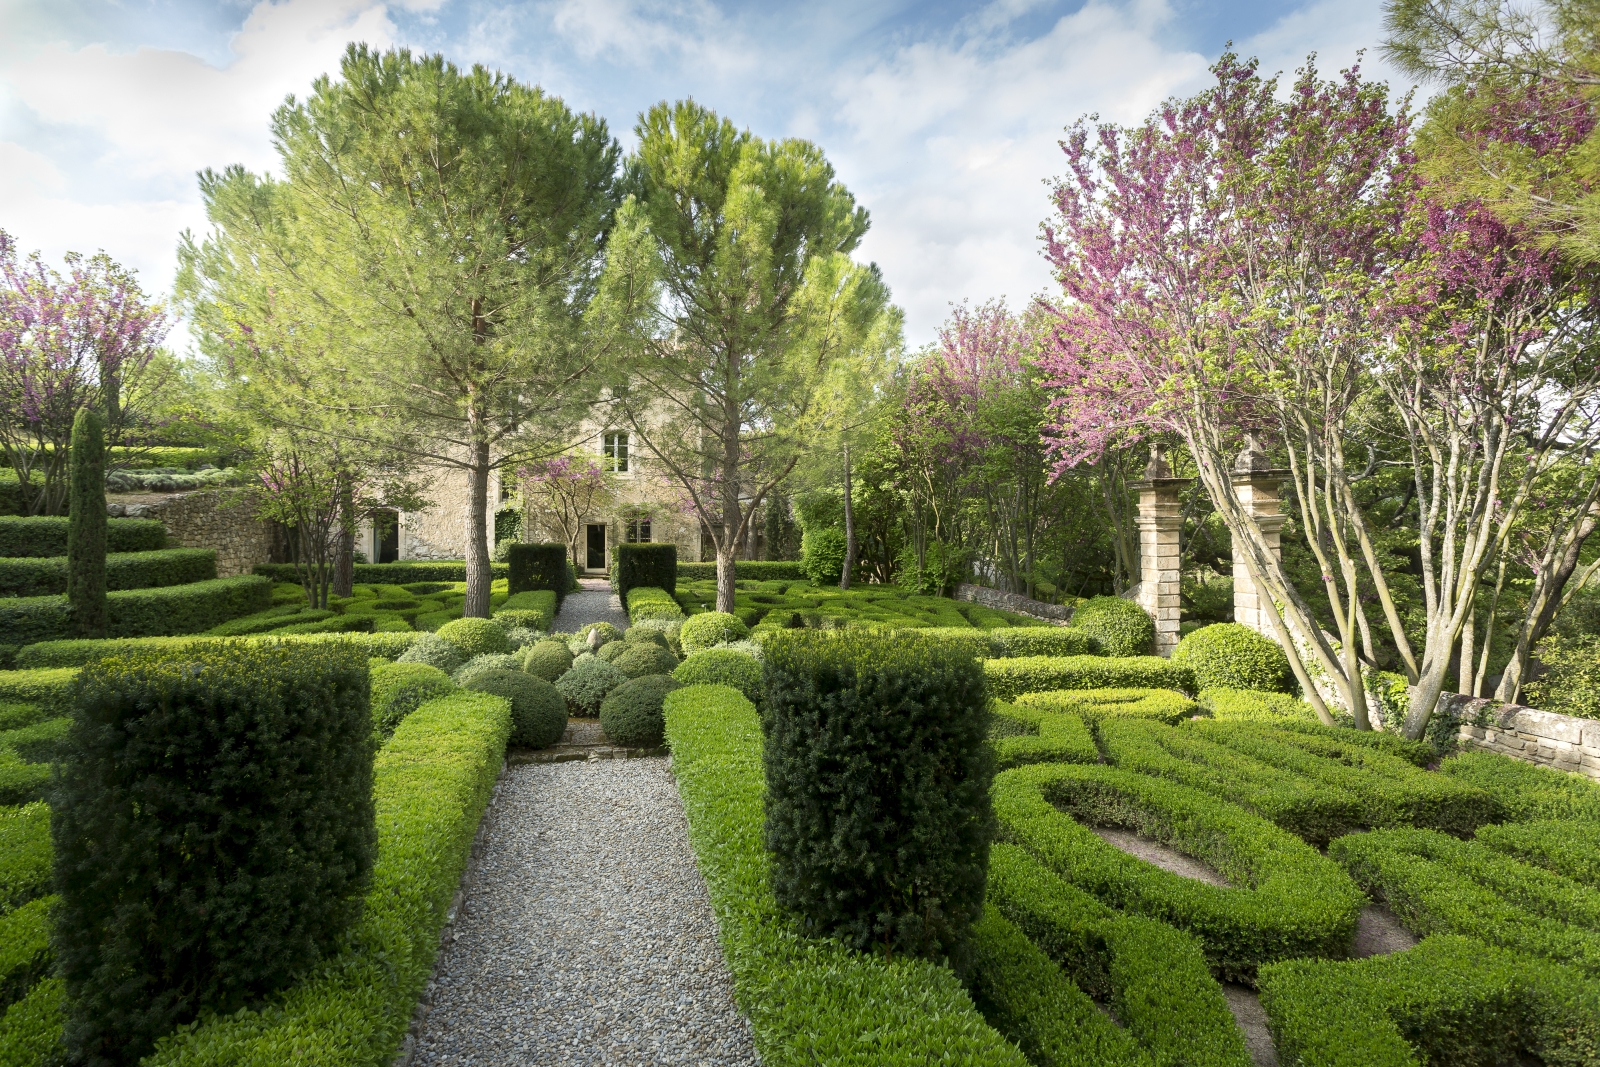 Façade of villa and gardens with trees, blossom, hedges and maze at Bastide Luberon in Provence, France